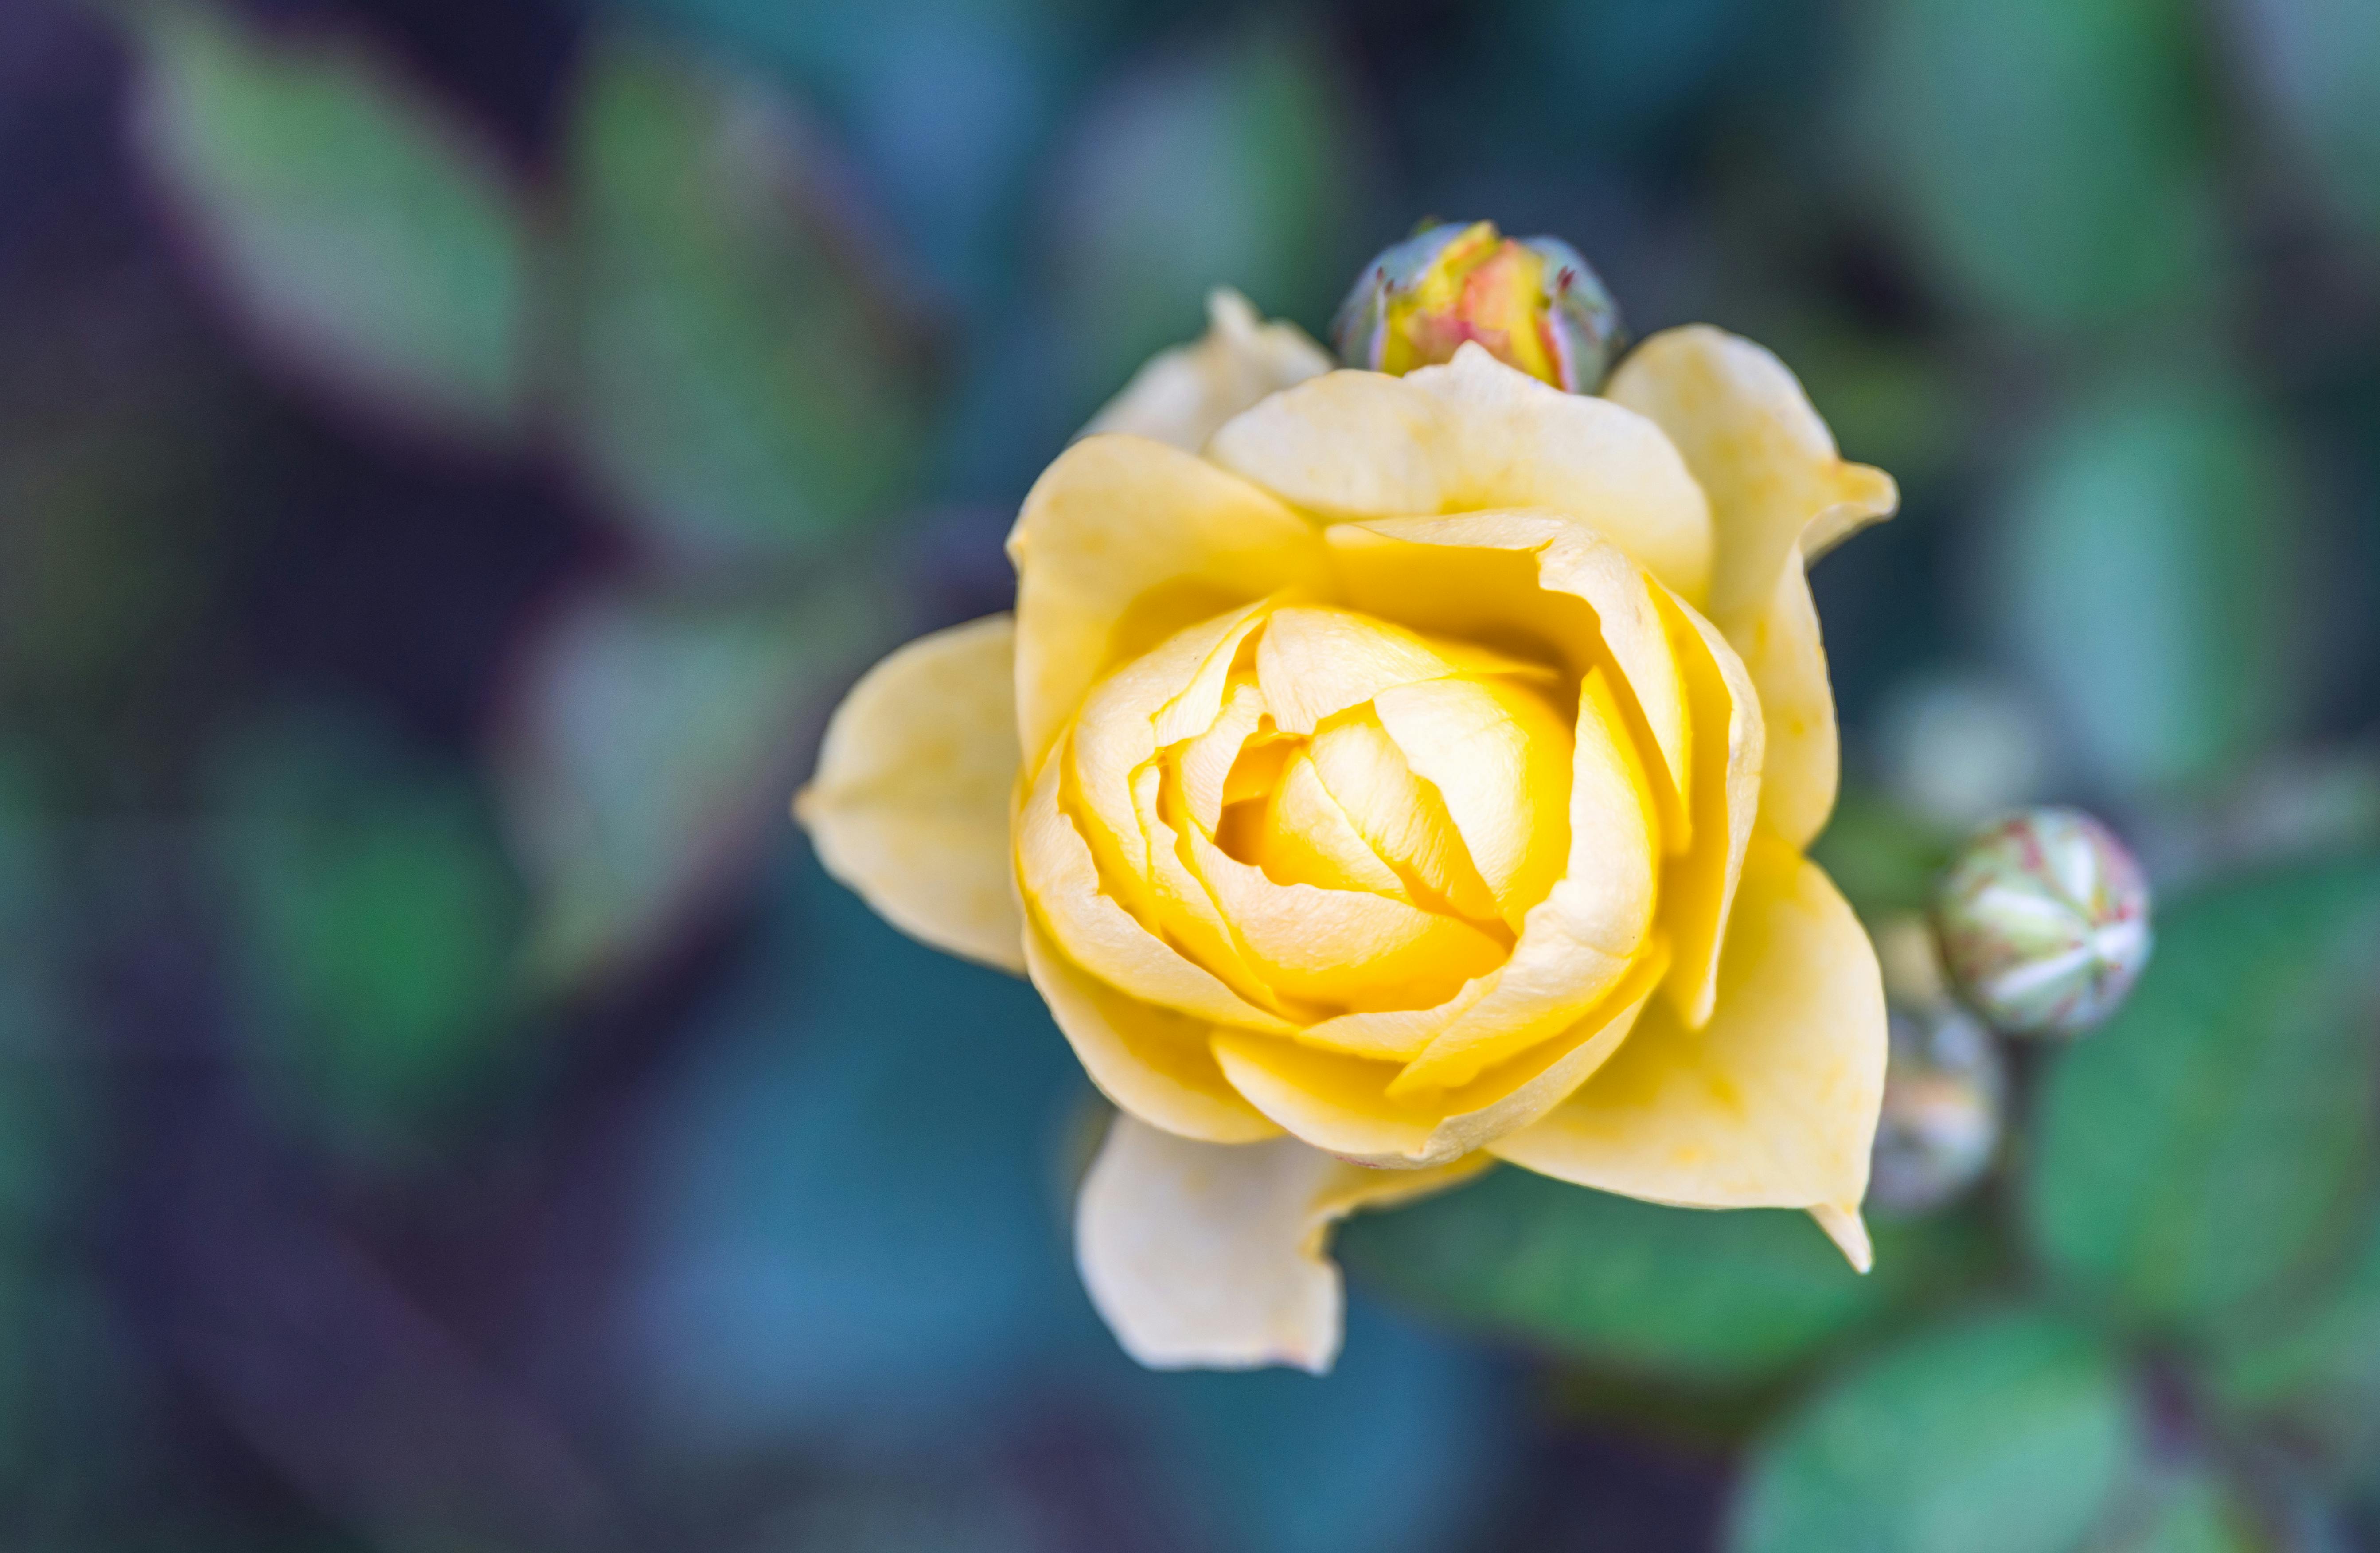 Free stock photo of flowers, rose